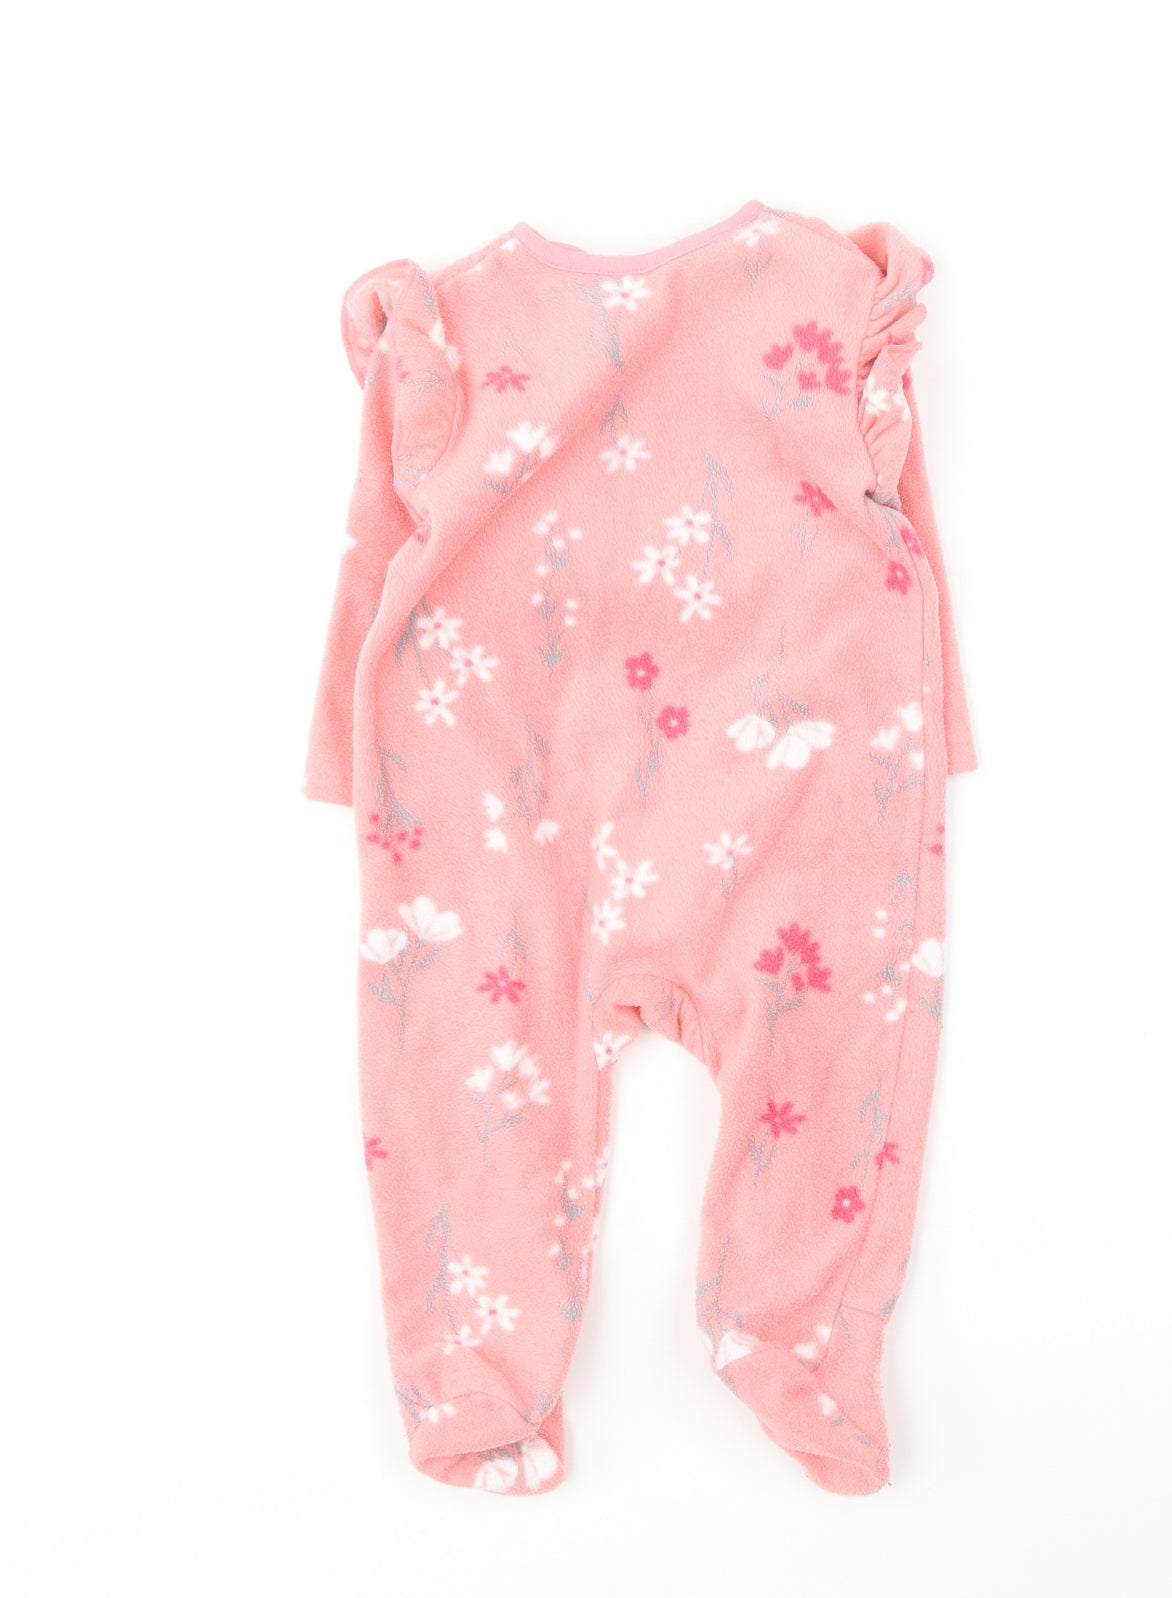 Dunnes Stores Baby Pink Floral Polyester Robe One Piece Size 3-6 Months Zip